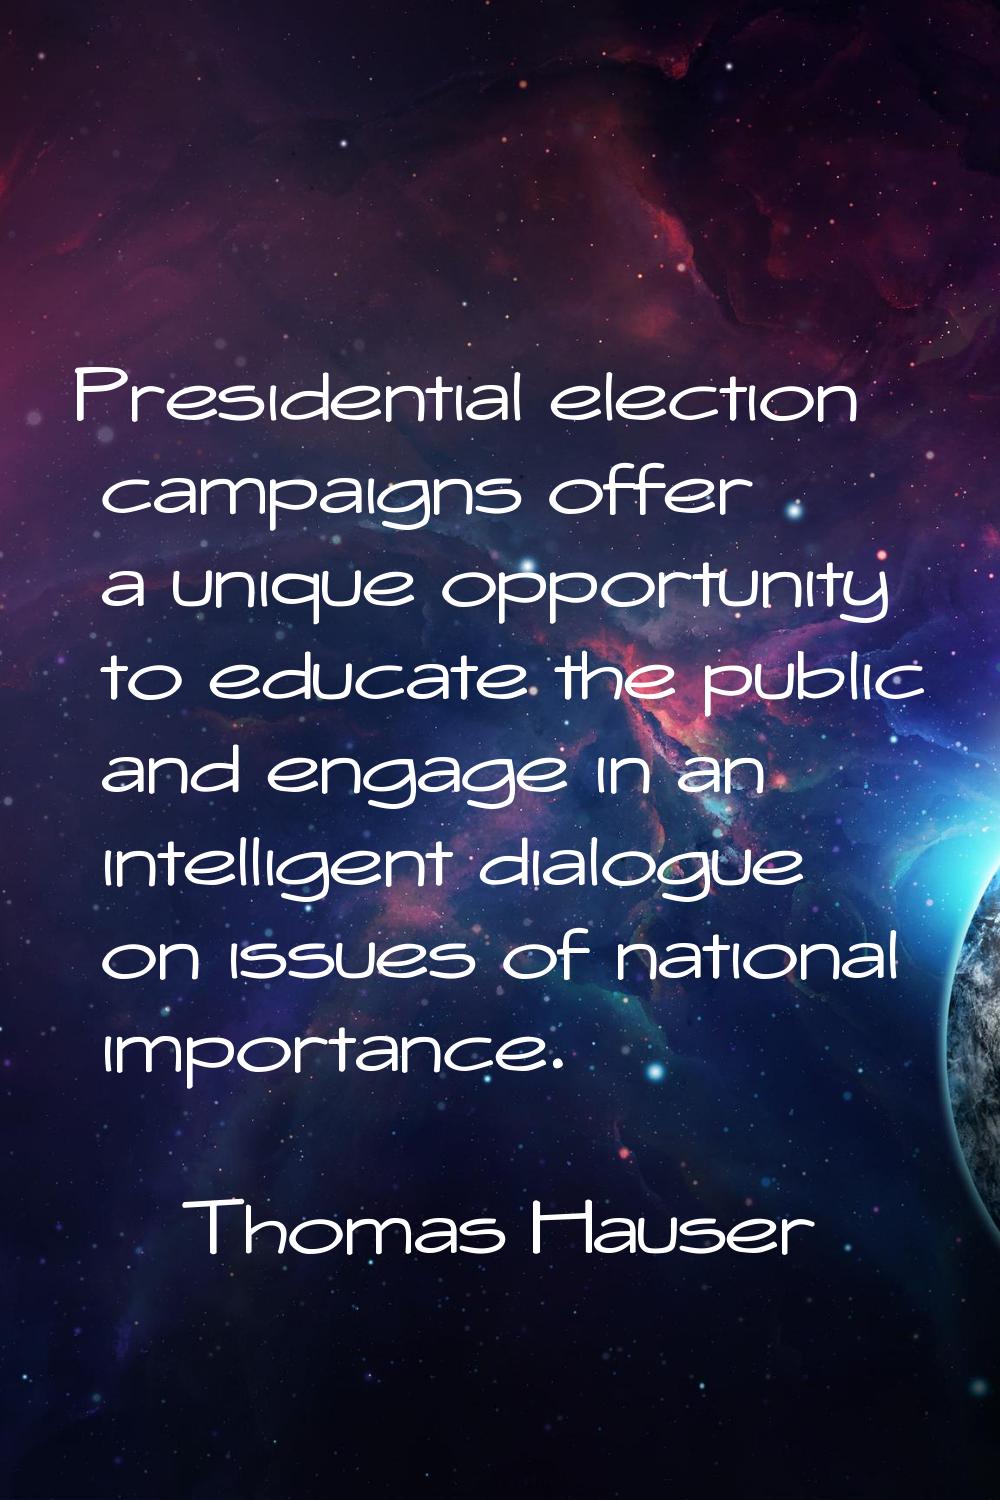 Presidential election campaigns offer a unique opportunity to educate the public and engage in an i